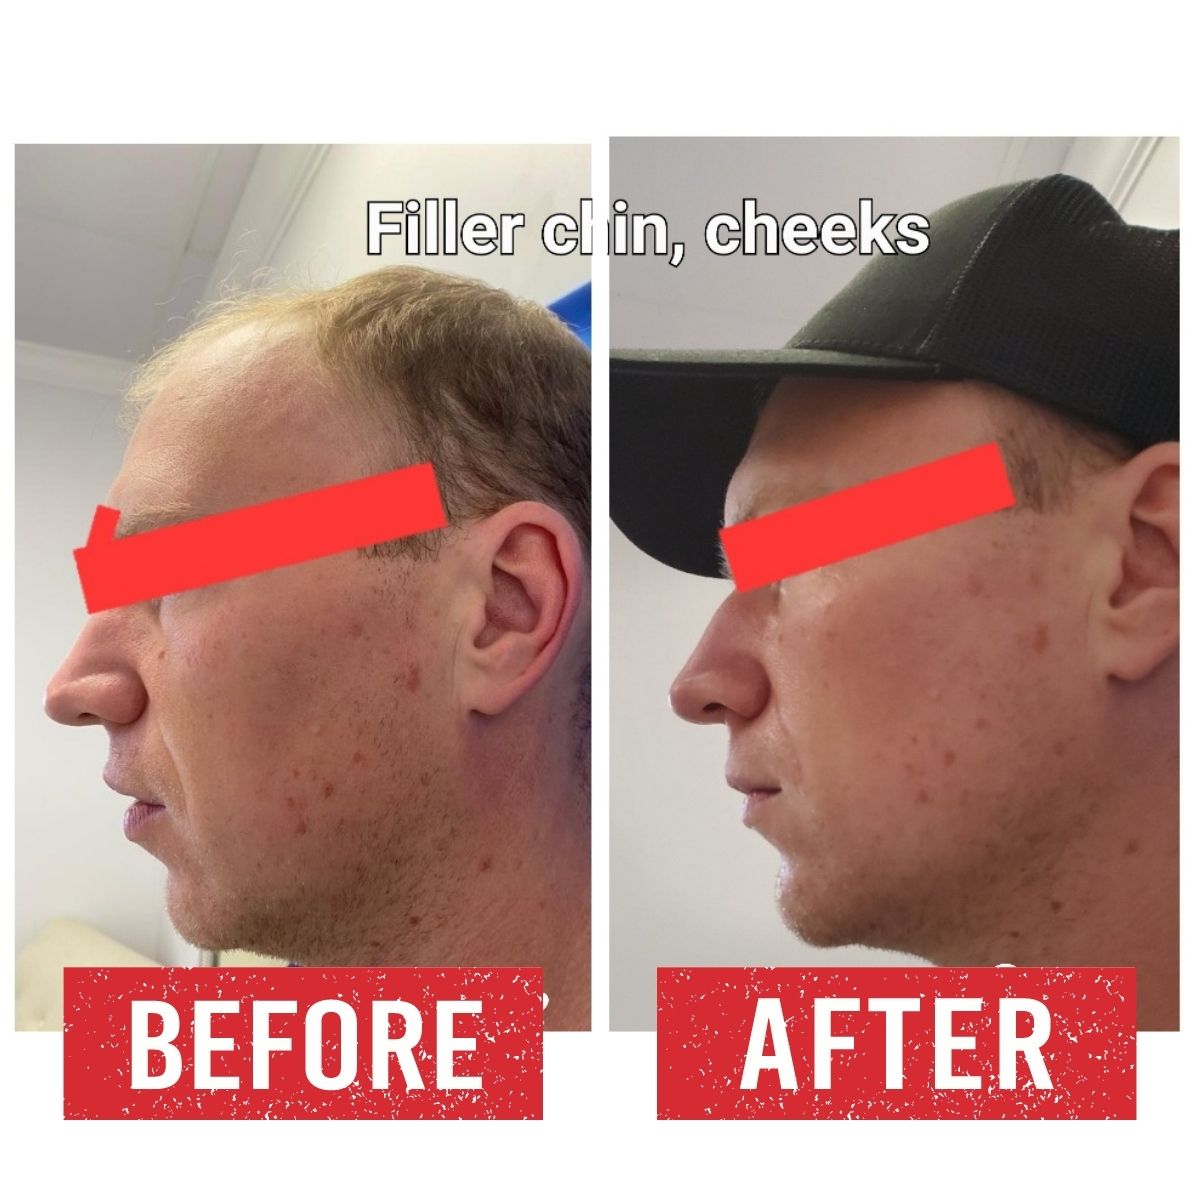 Filler treatment before and after.